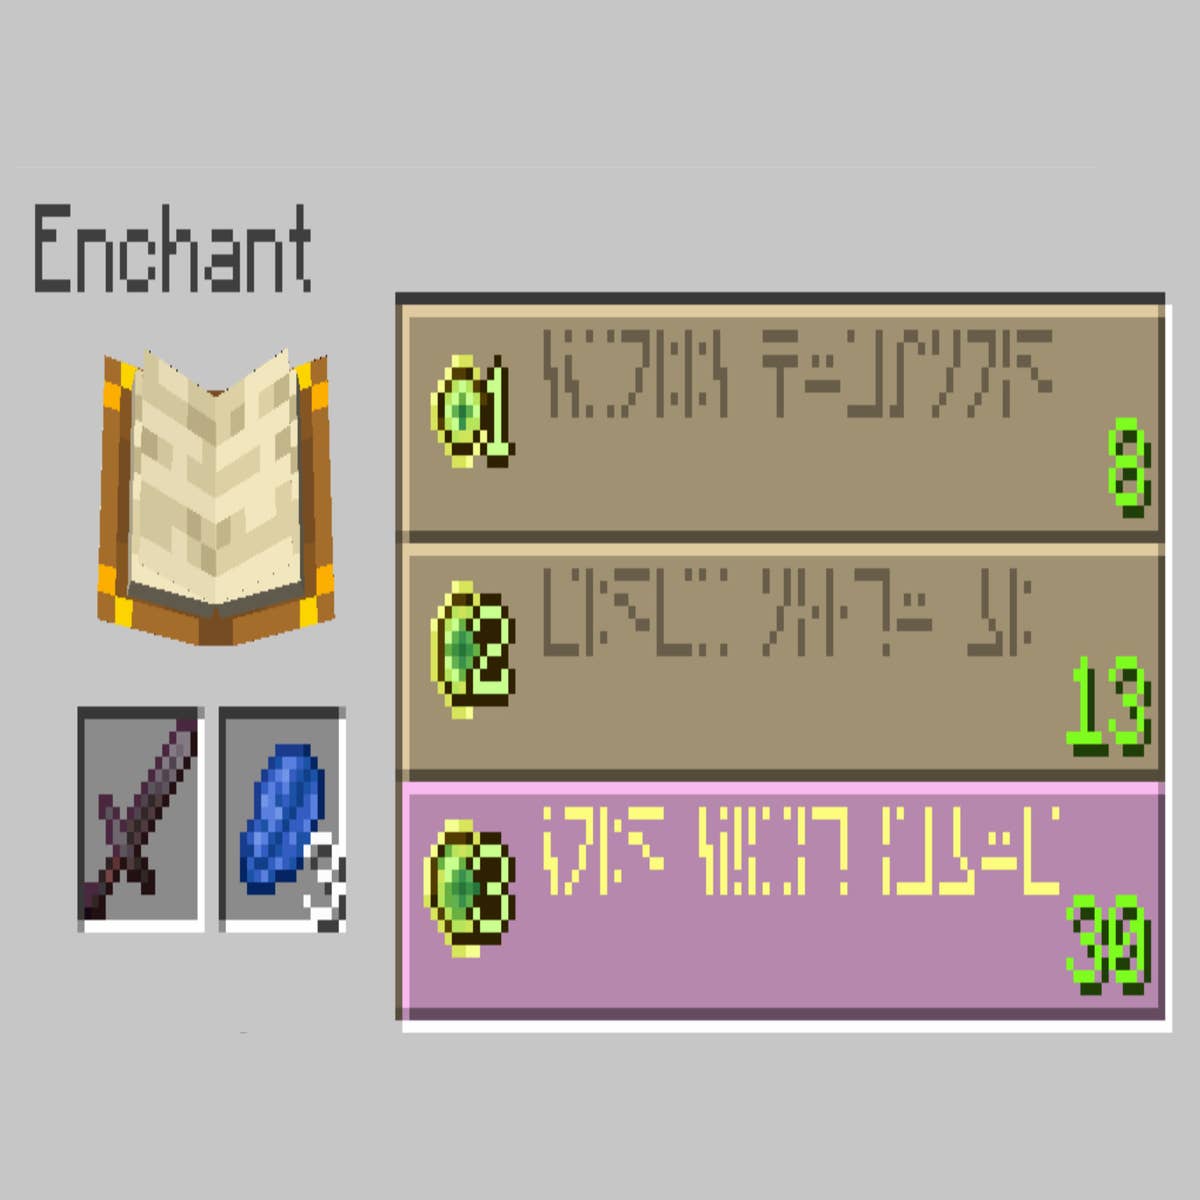 Minecraft enchantments guide: how to use your enchanting table